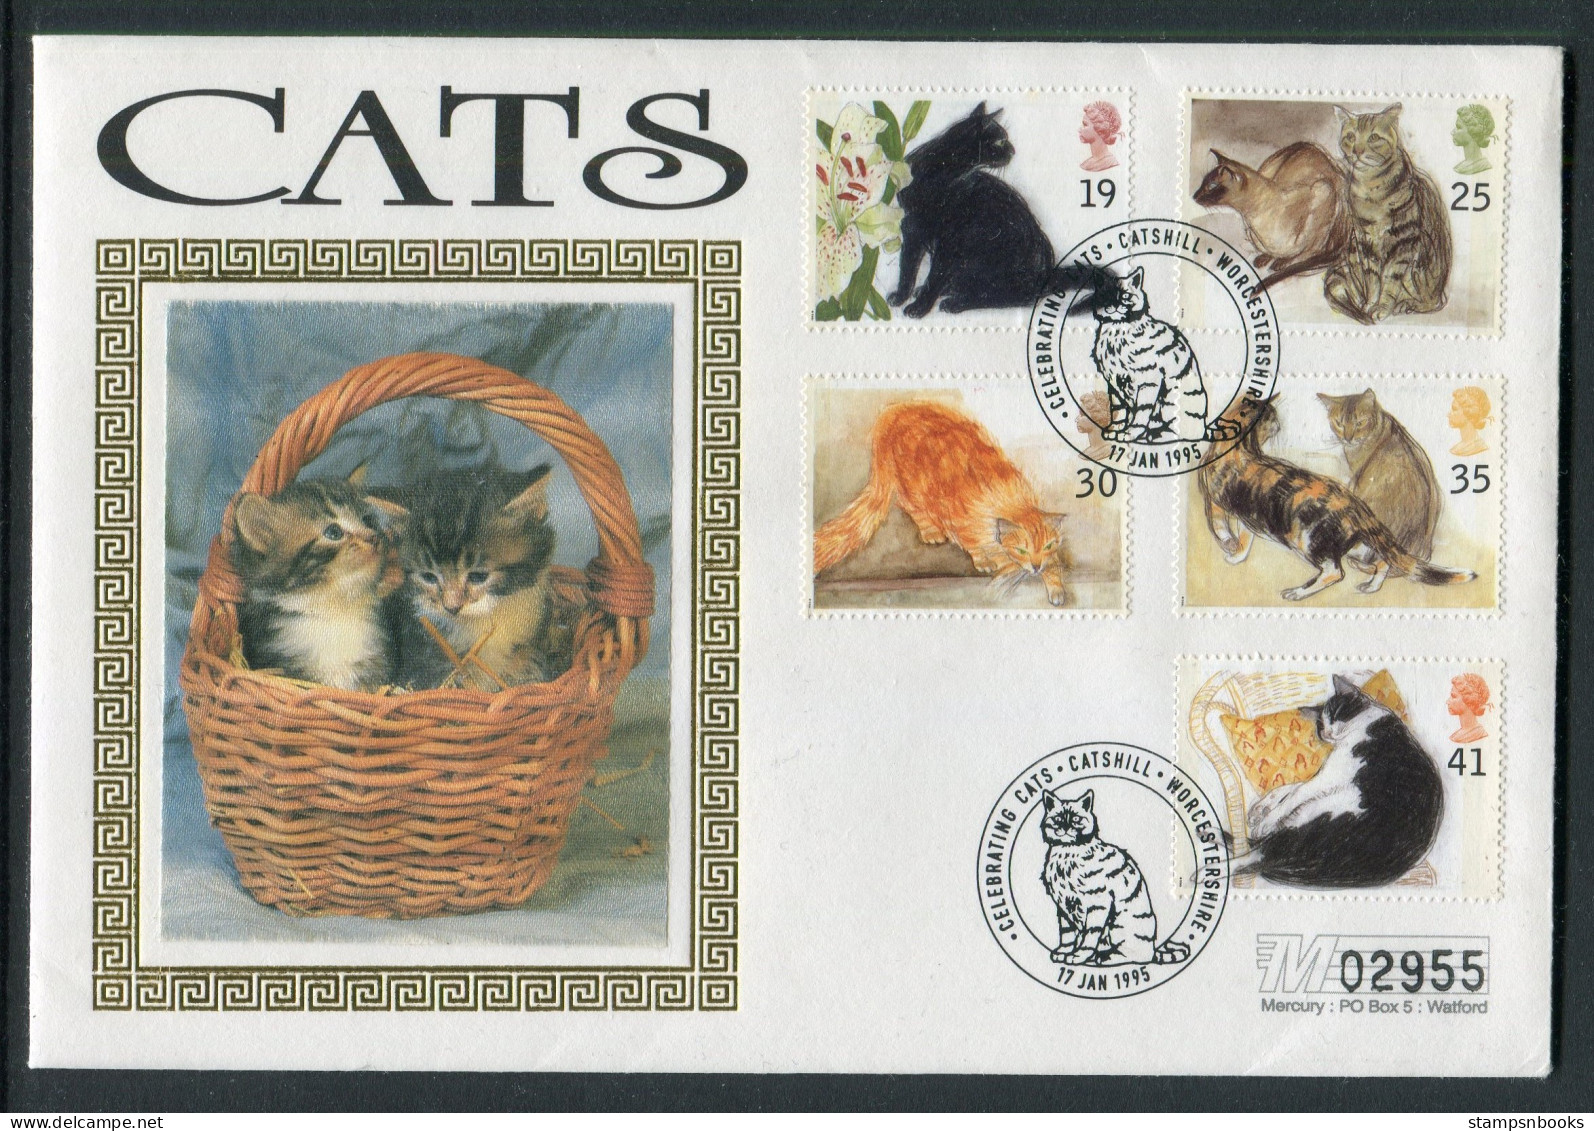 1995 GB Cats First Day Cover, Catshill Worcestershire FDC - 1991-2000 Decimal Issues